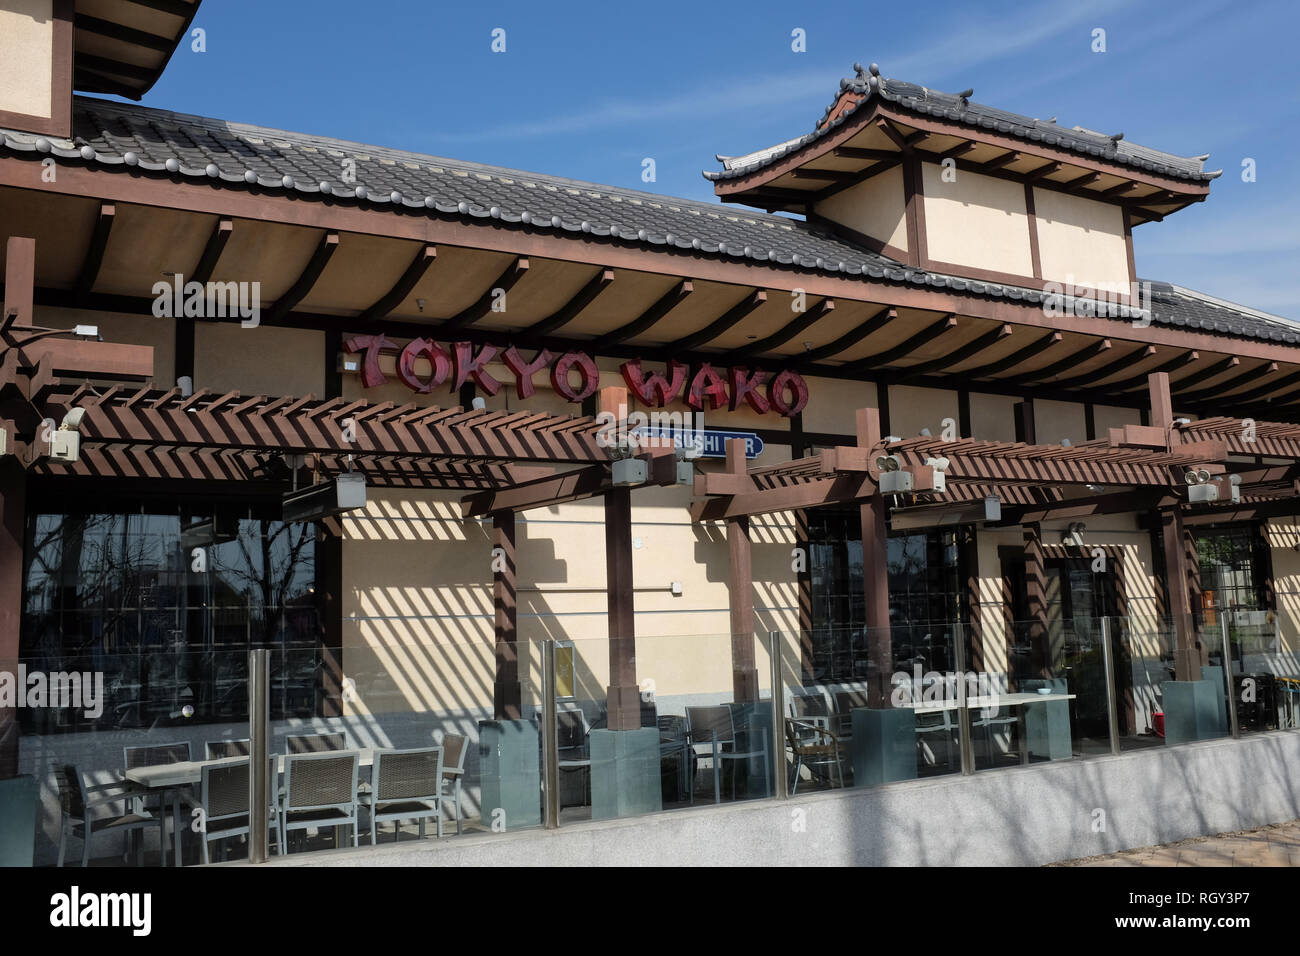 LONG BEACH, CALIFORNIA - JAN 30, 2019: Tokyo Wako Restaurant at Shoreline Village, a local Japanese chain featuring sushi and steaks grilled tableside Stock Photo